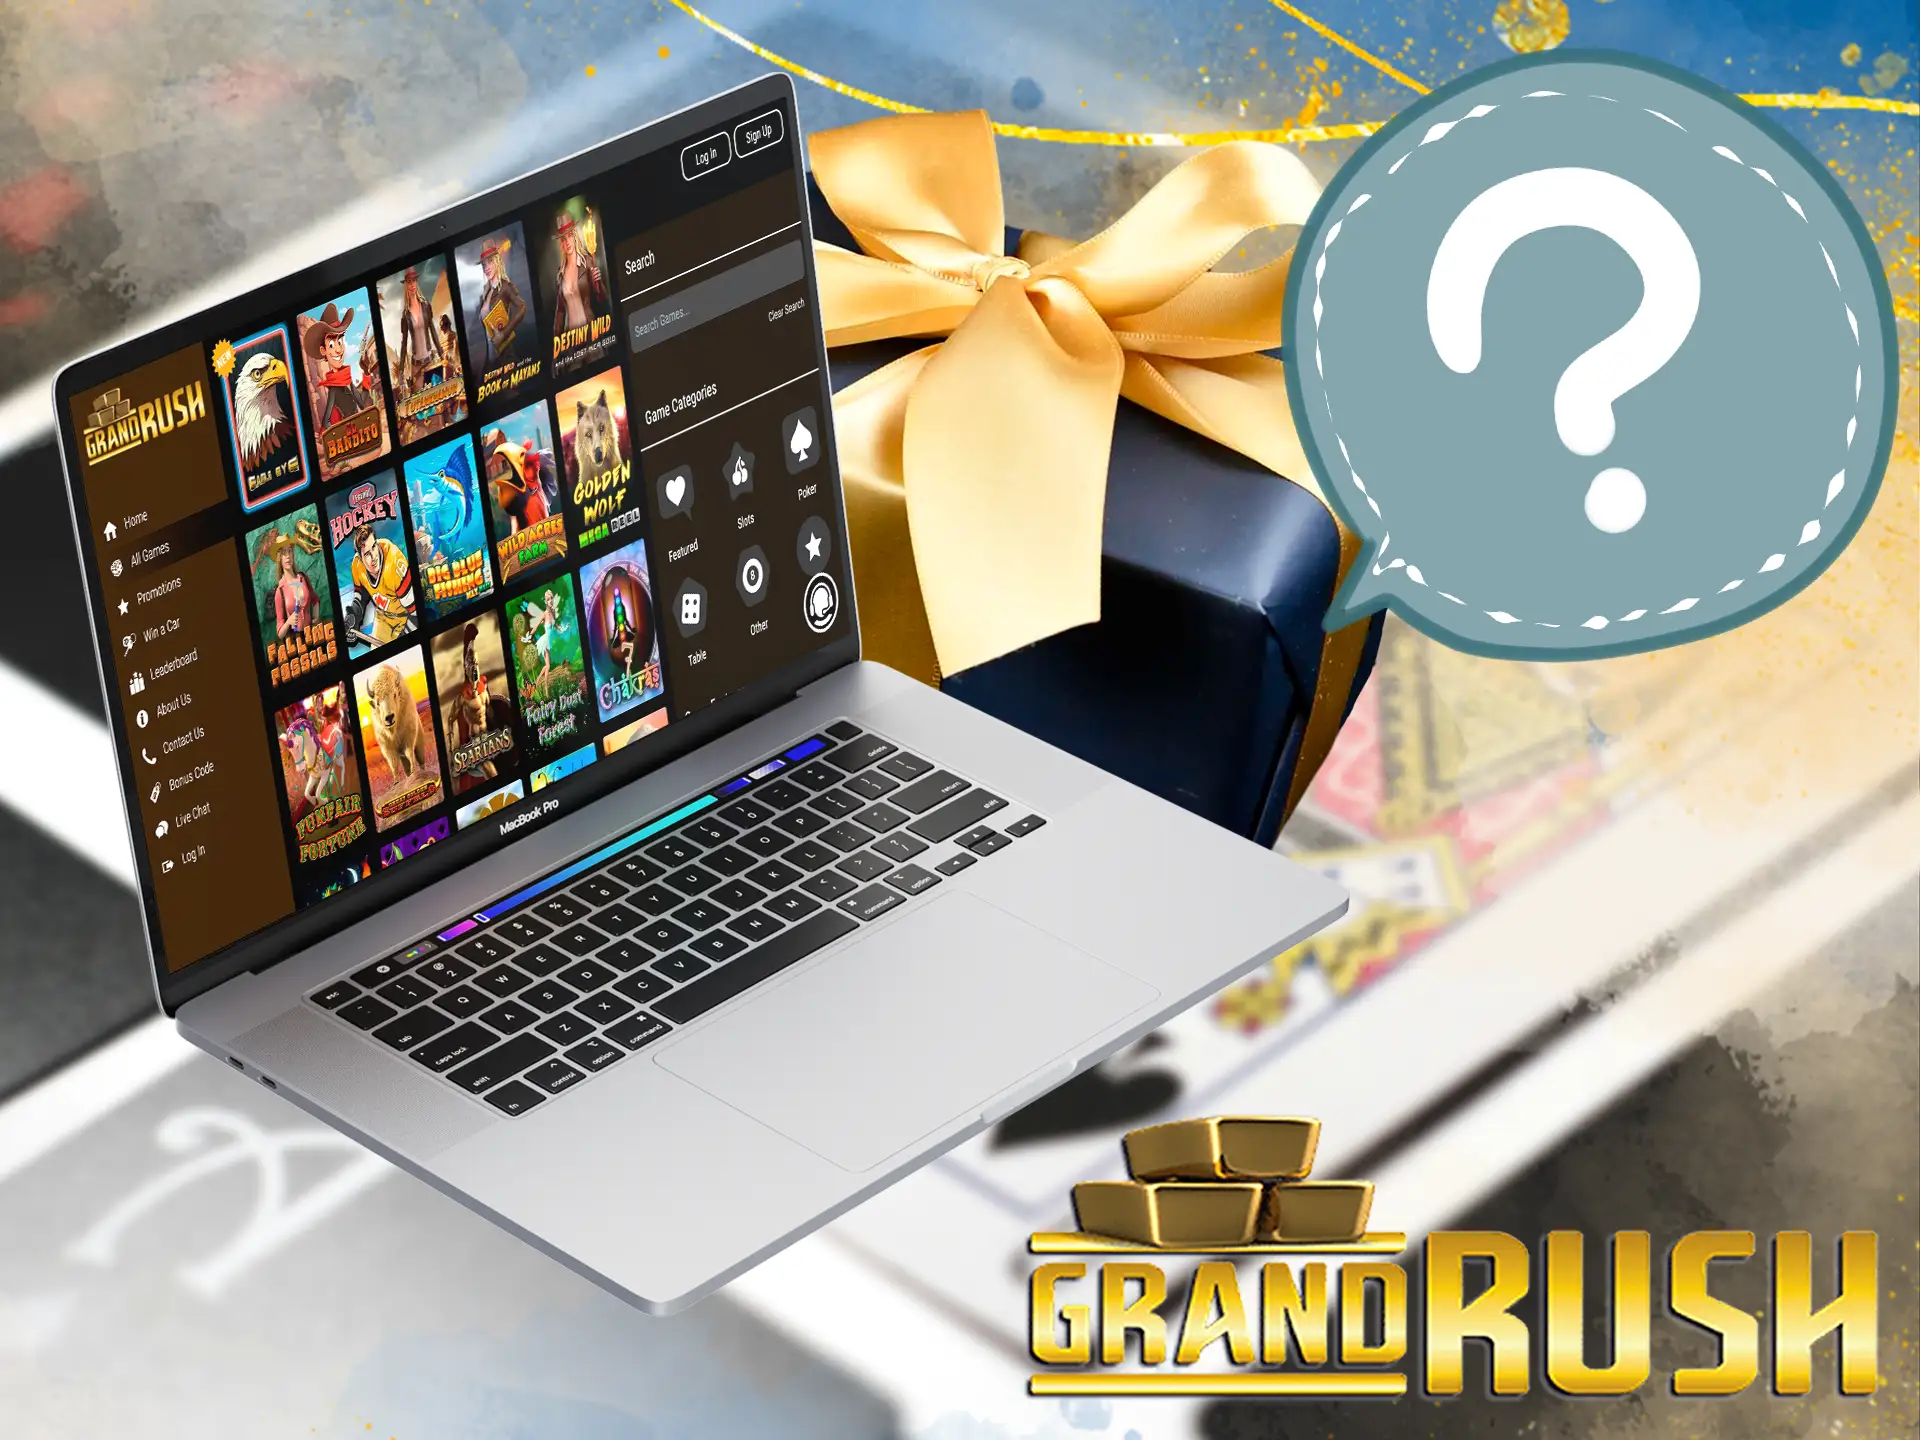 Enter Grand Rush bonus code in the special box while creating an account.